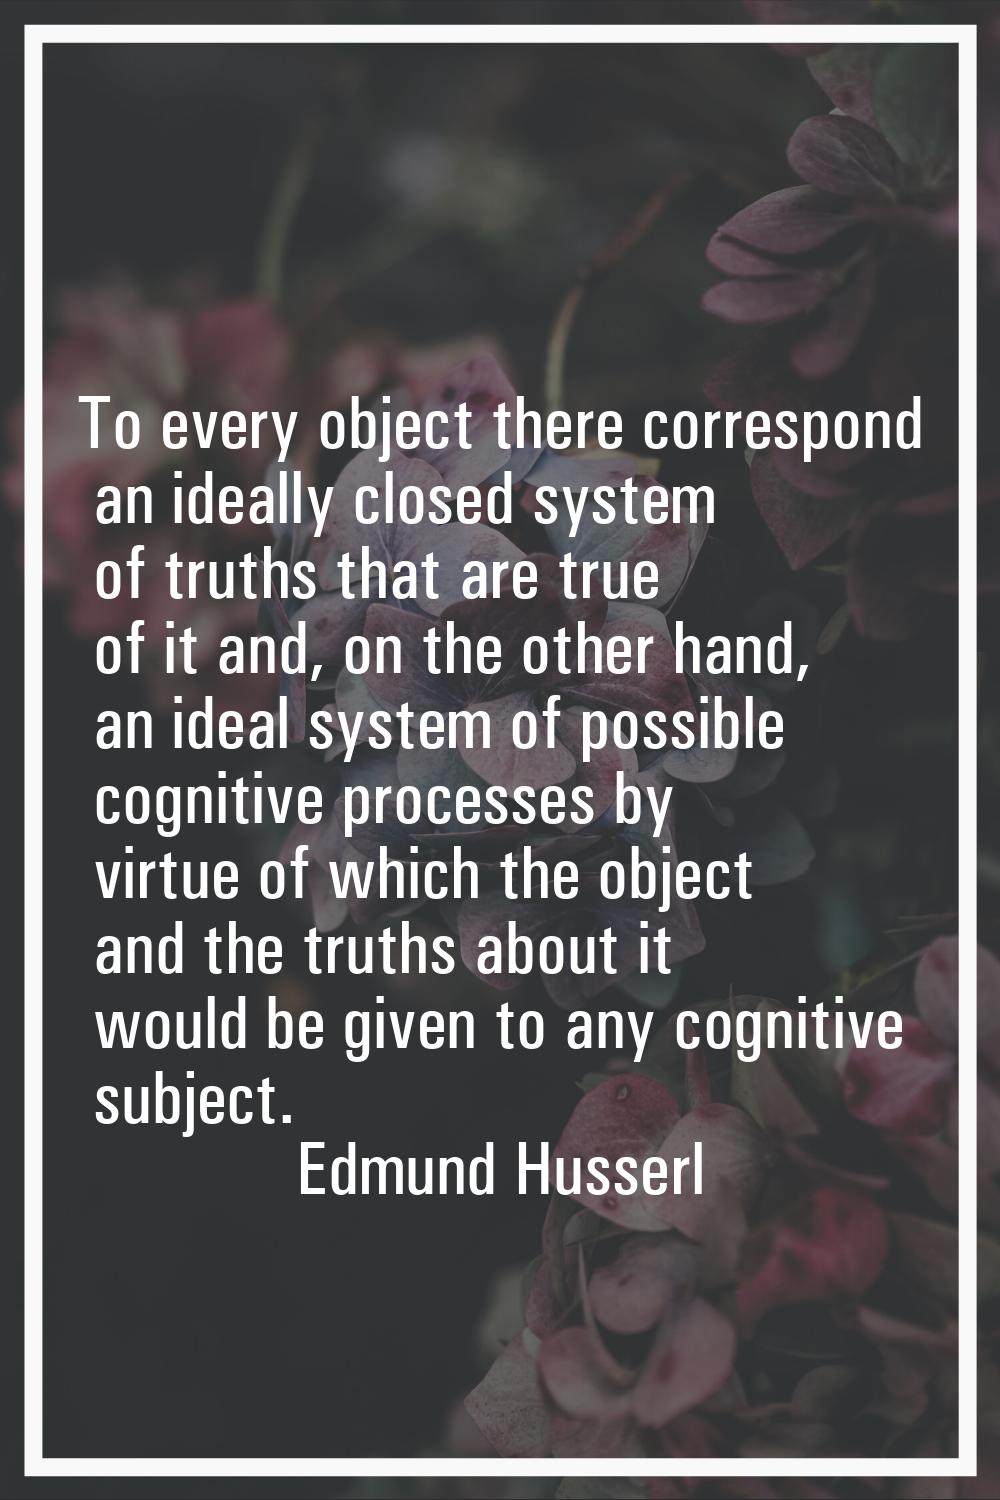 To every object there correspond an ideally closed system of truths that are true of it and, on the